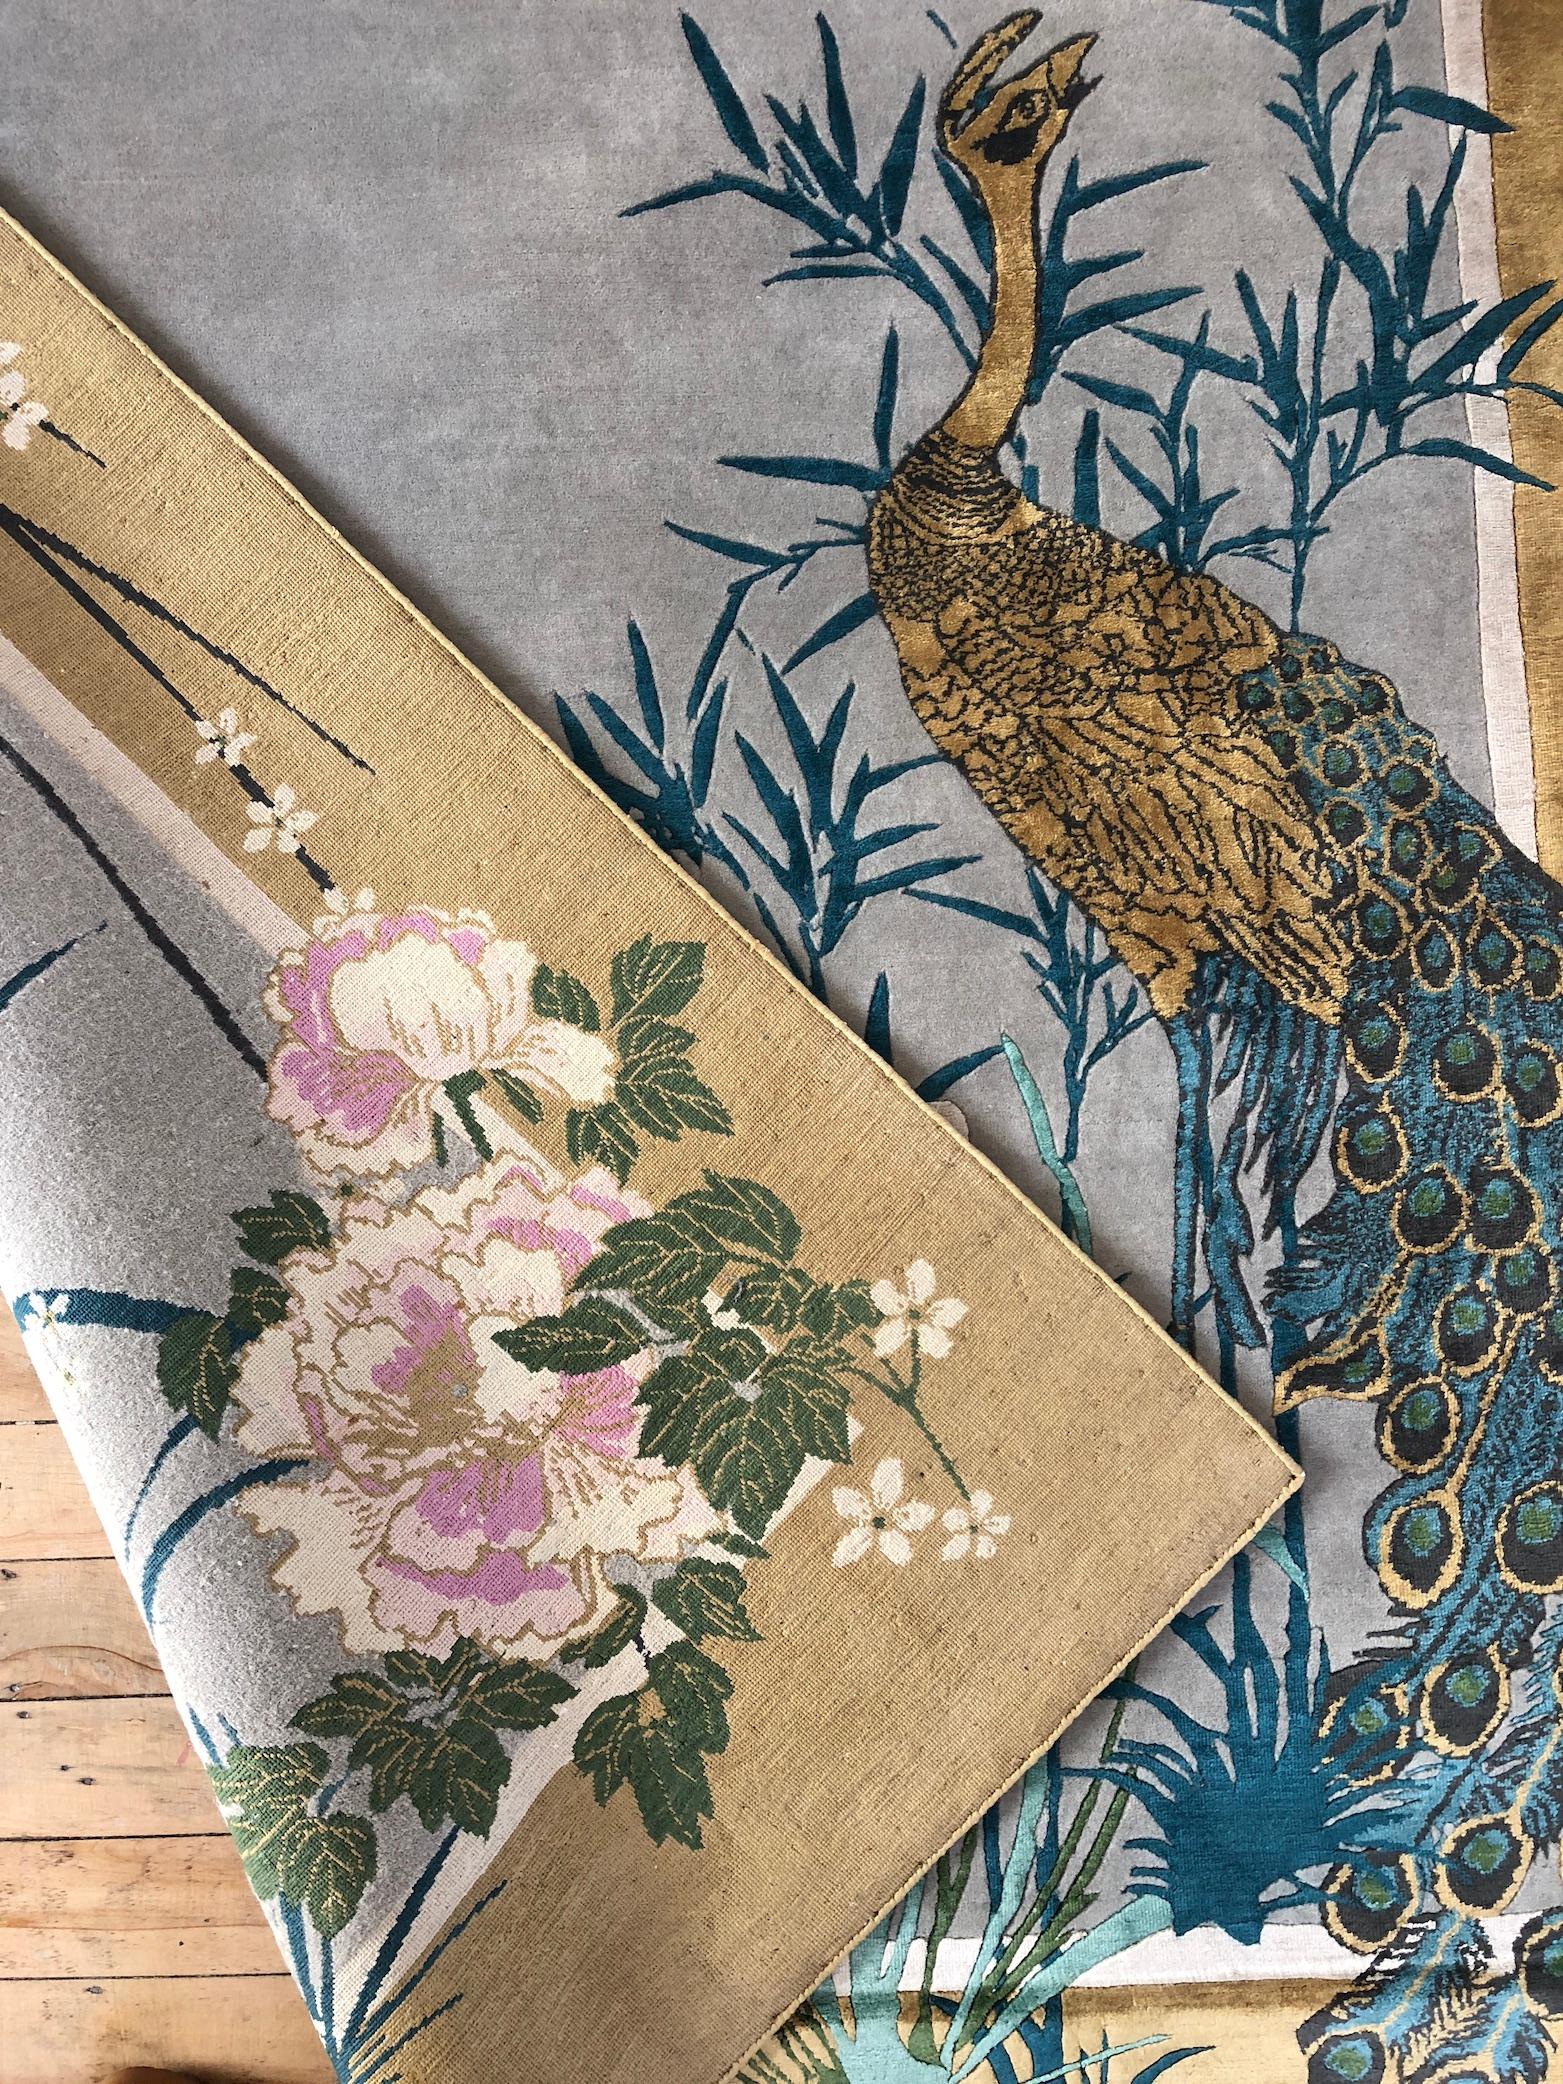 Chinese garden of virtue is a hand knotted wool and silk rug by Scottish designer Wendy Morrison. The rug is handcrafted in India using only the finest wool and silk and is Goodweave certified, meaning you can be confident that no child labour has